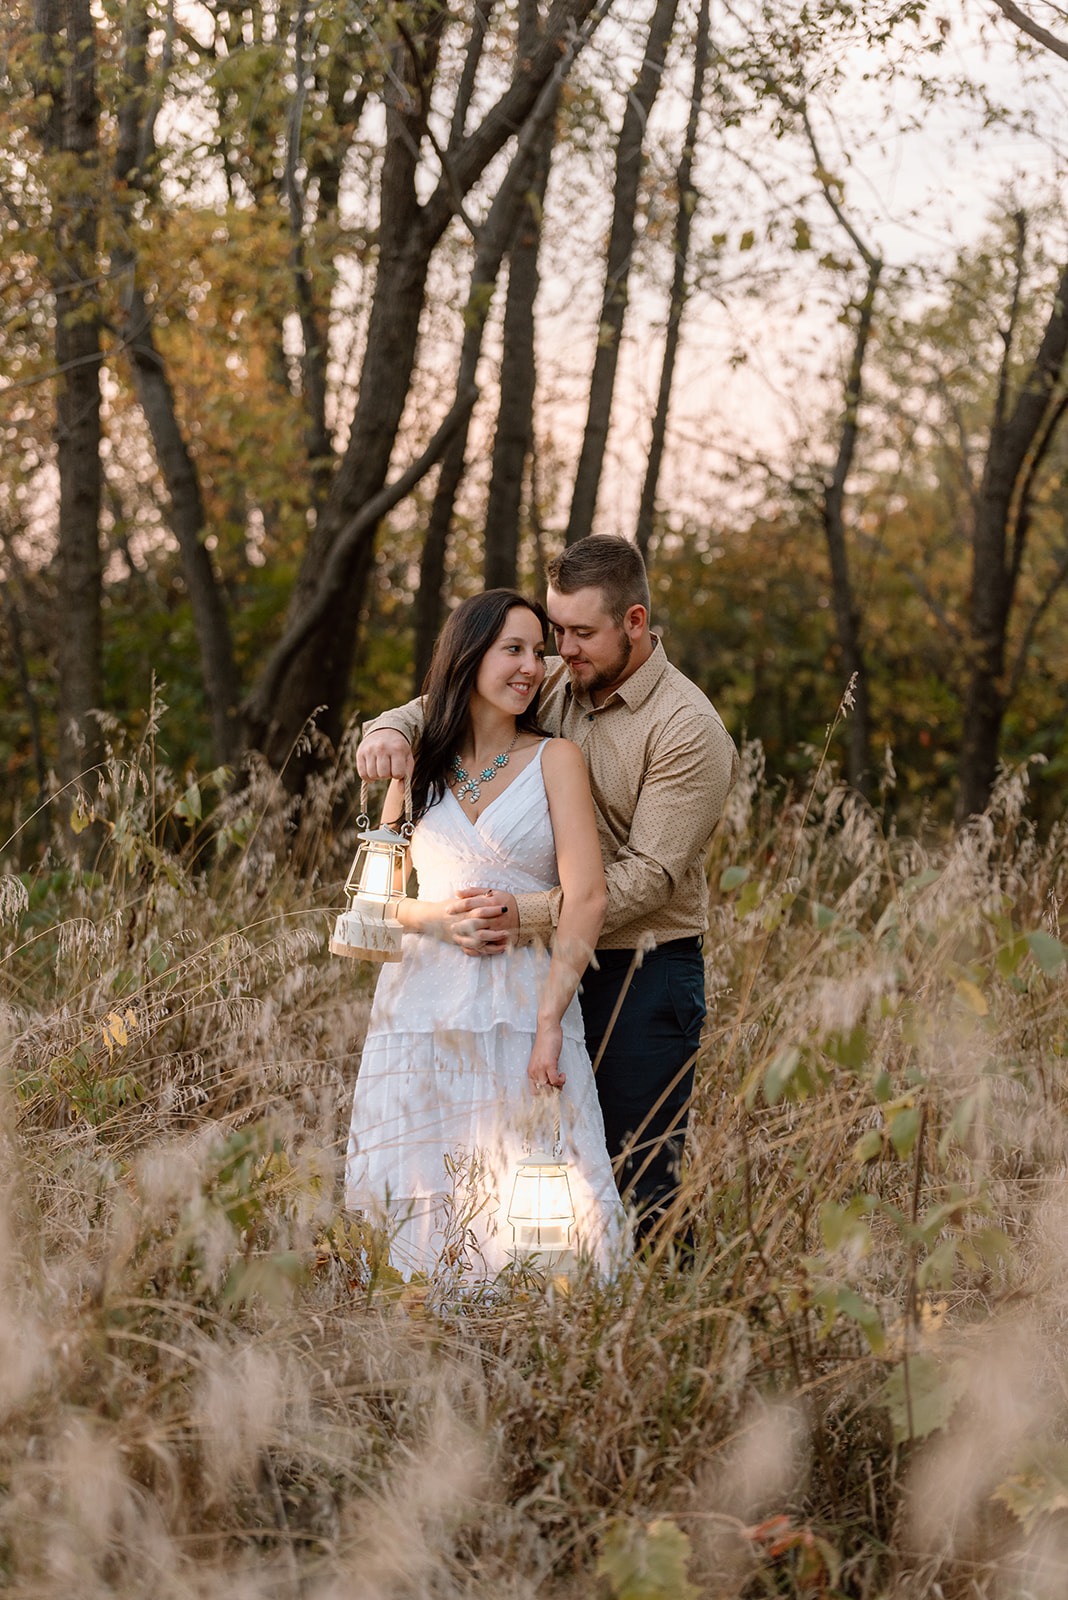 Man embraces woman from behind in the tall grass after sunset with lanterns